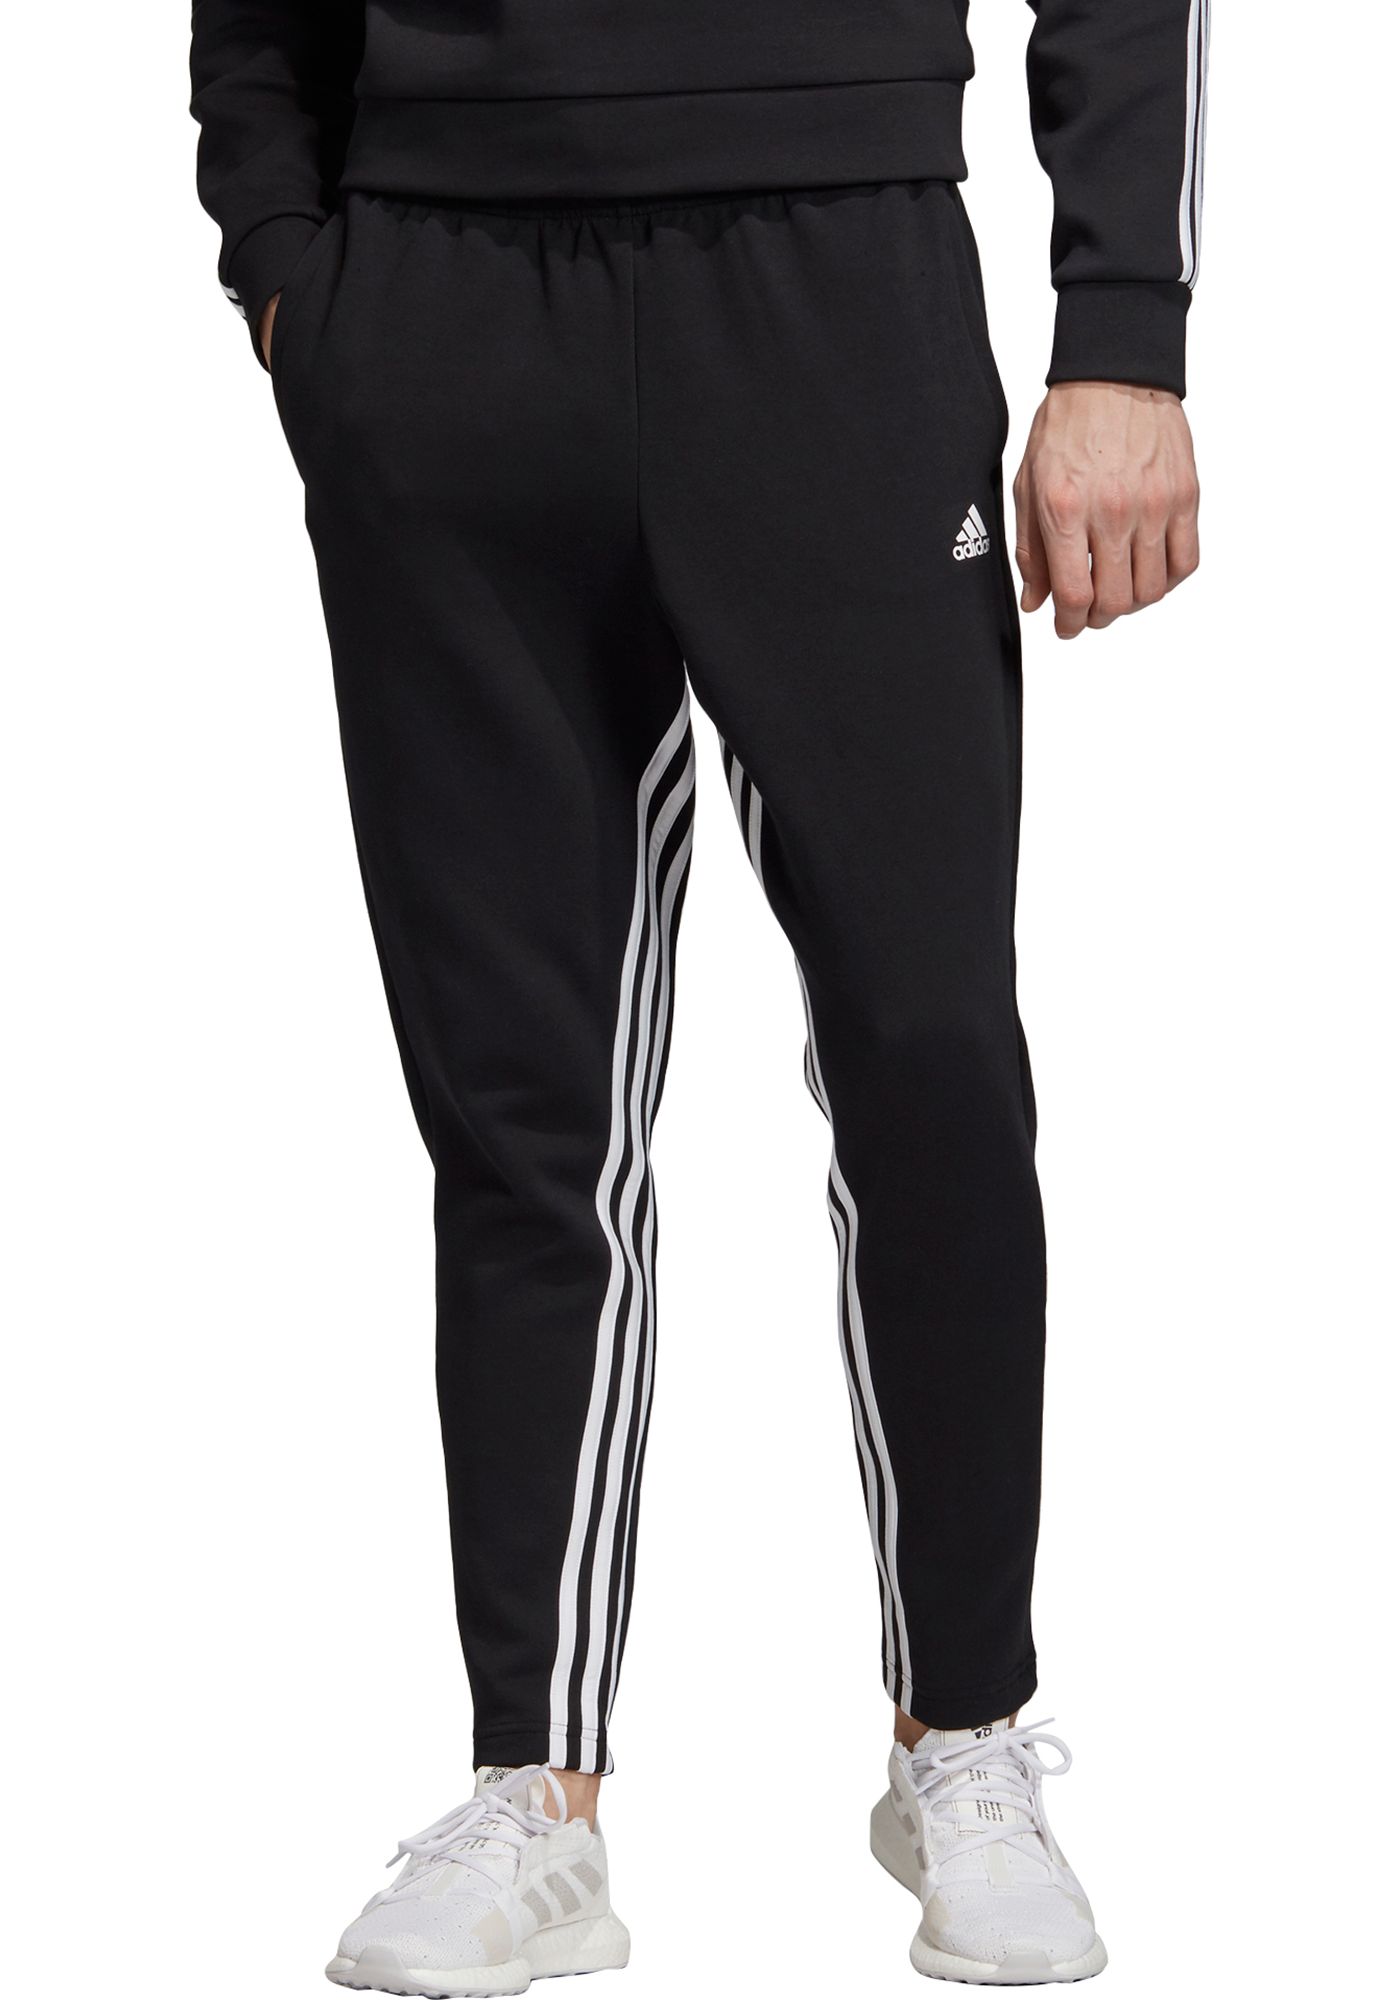 adidas Men's Must Haves 3-Stripes Tapered Pants | DICK'S Sporting Goods